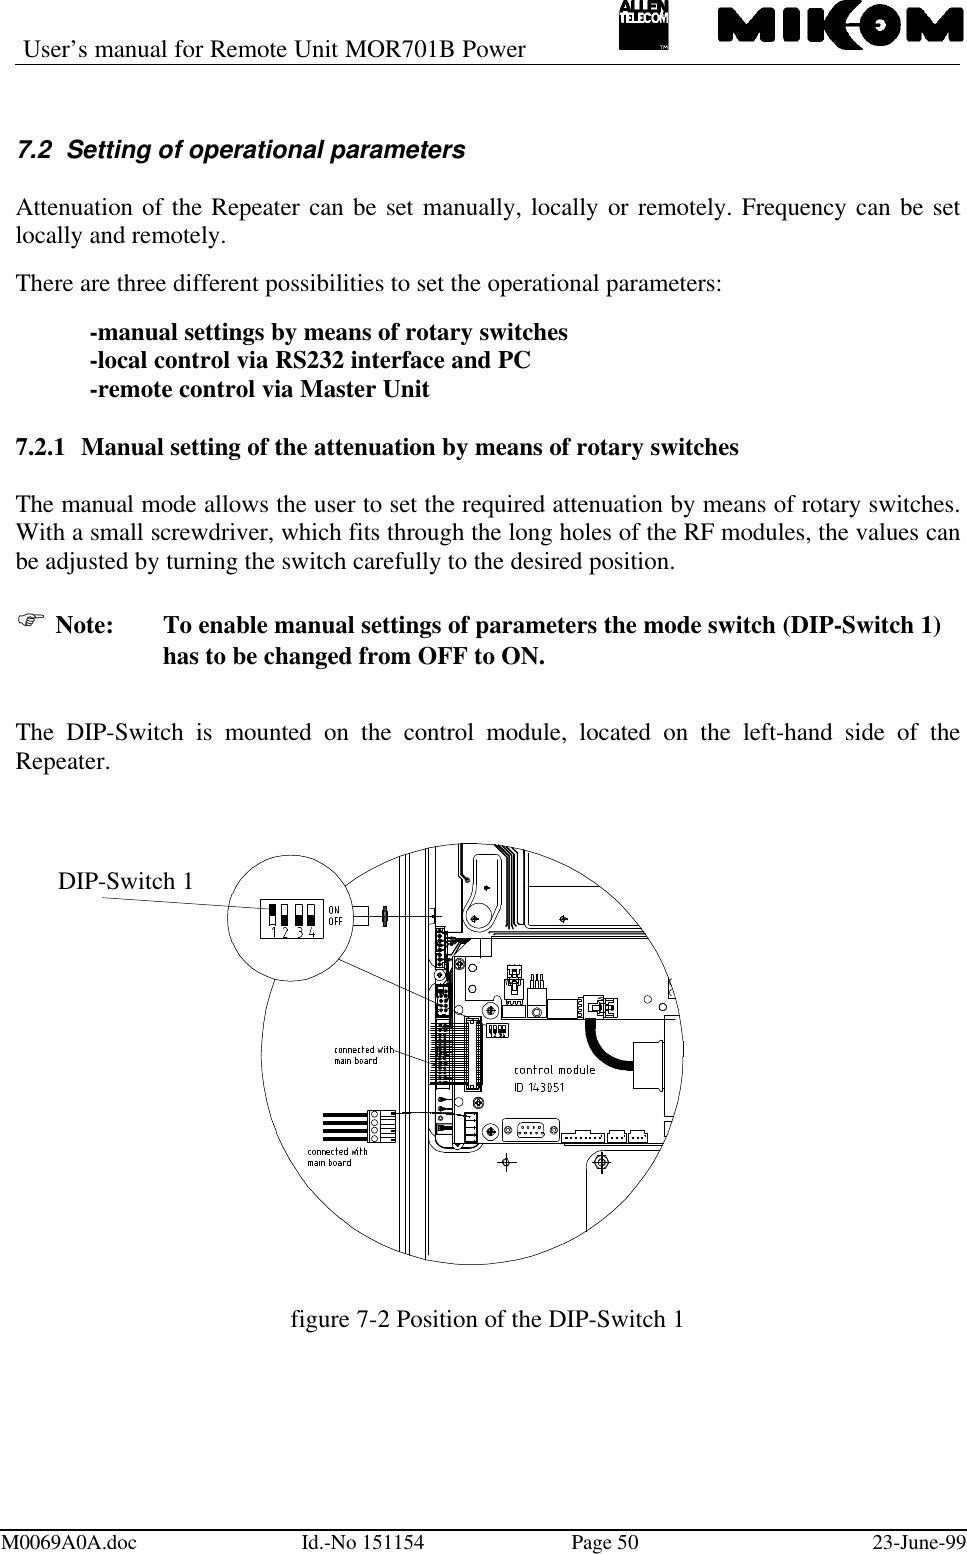 User’s manual for Remote Unit MOR701B PowerM0069A0A.doc Id.-No 151154 Page 50 23-June-997.2 Setting of operational parametersAttenuation of the Repeater can be set manually, locally or remotely. Frequency can be setlocally and remotely.There are three different possibilities to set the operational parameters:-manual settings by means of rotary switches-local control via RS232 interface and PC-remote control via Master Unit7.2.1 Manual setting of the attenuation by means of rotary switchesThe manual mode allows the user to set the required attenuation by means of rotary switches.With a small screwdriver, which fits through the long holes of the RF modules, the values canbe adjusted by turning the switch carefully to the desired position.F Note: To enable manual settings of parameters the mode switch (DIP-Switch 1)has to be changed from OFF to ON.The DIP-Switch is mounted on the control module, located on the left-hand side of theRepeater.figure 7-2 Position of the DIP-Switch 1DIP-Switch 1